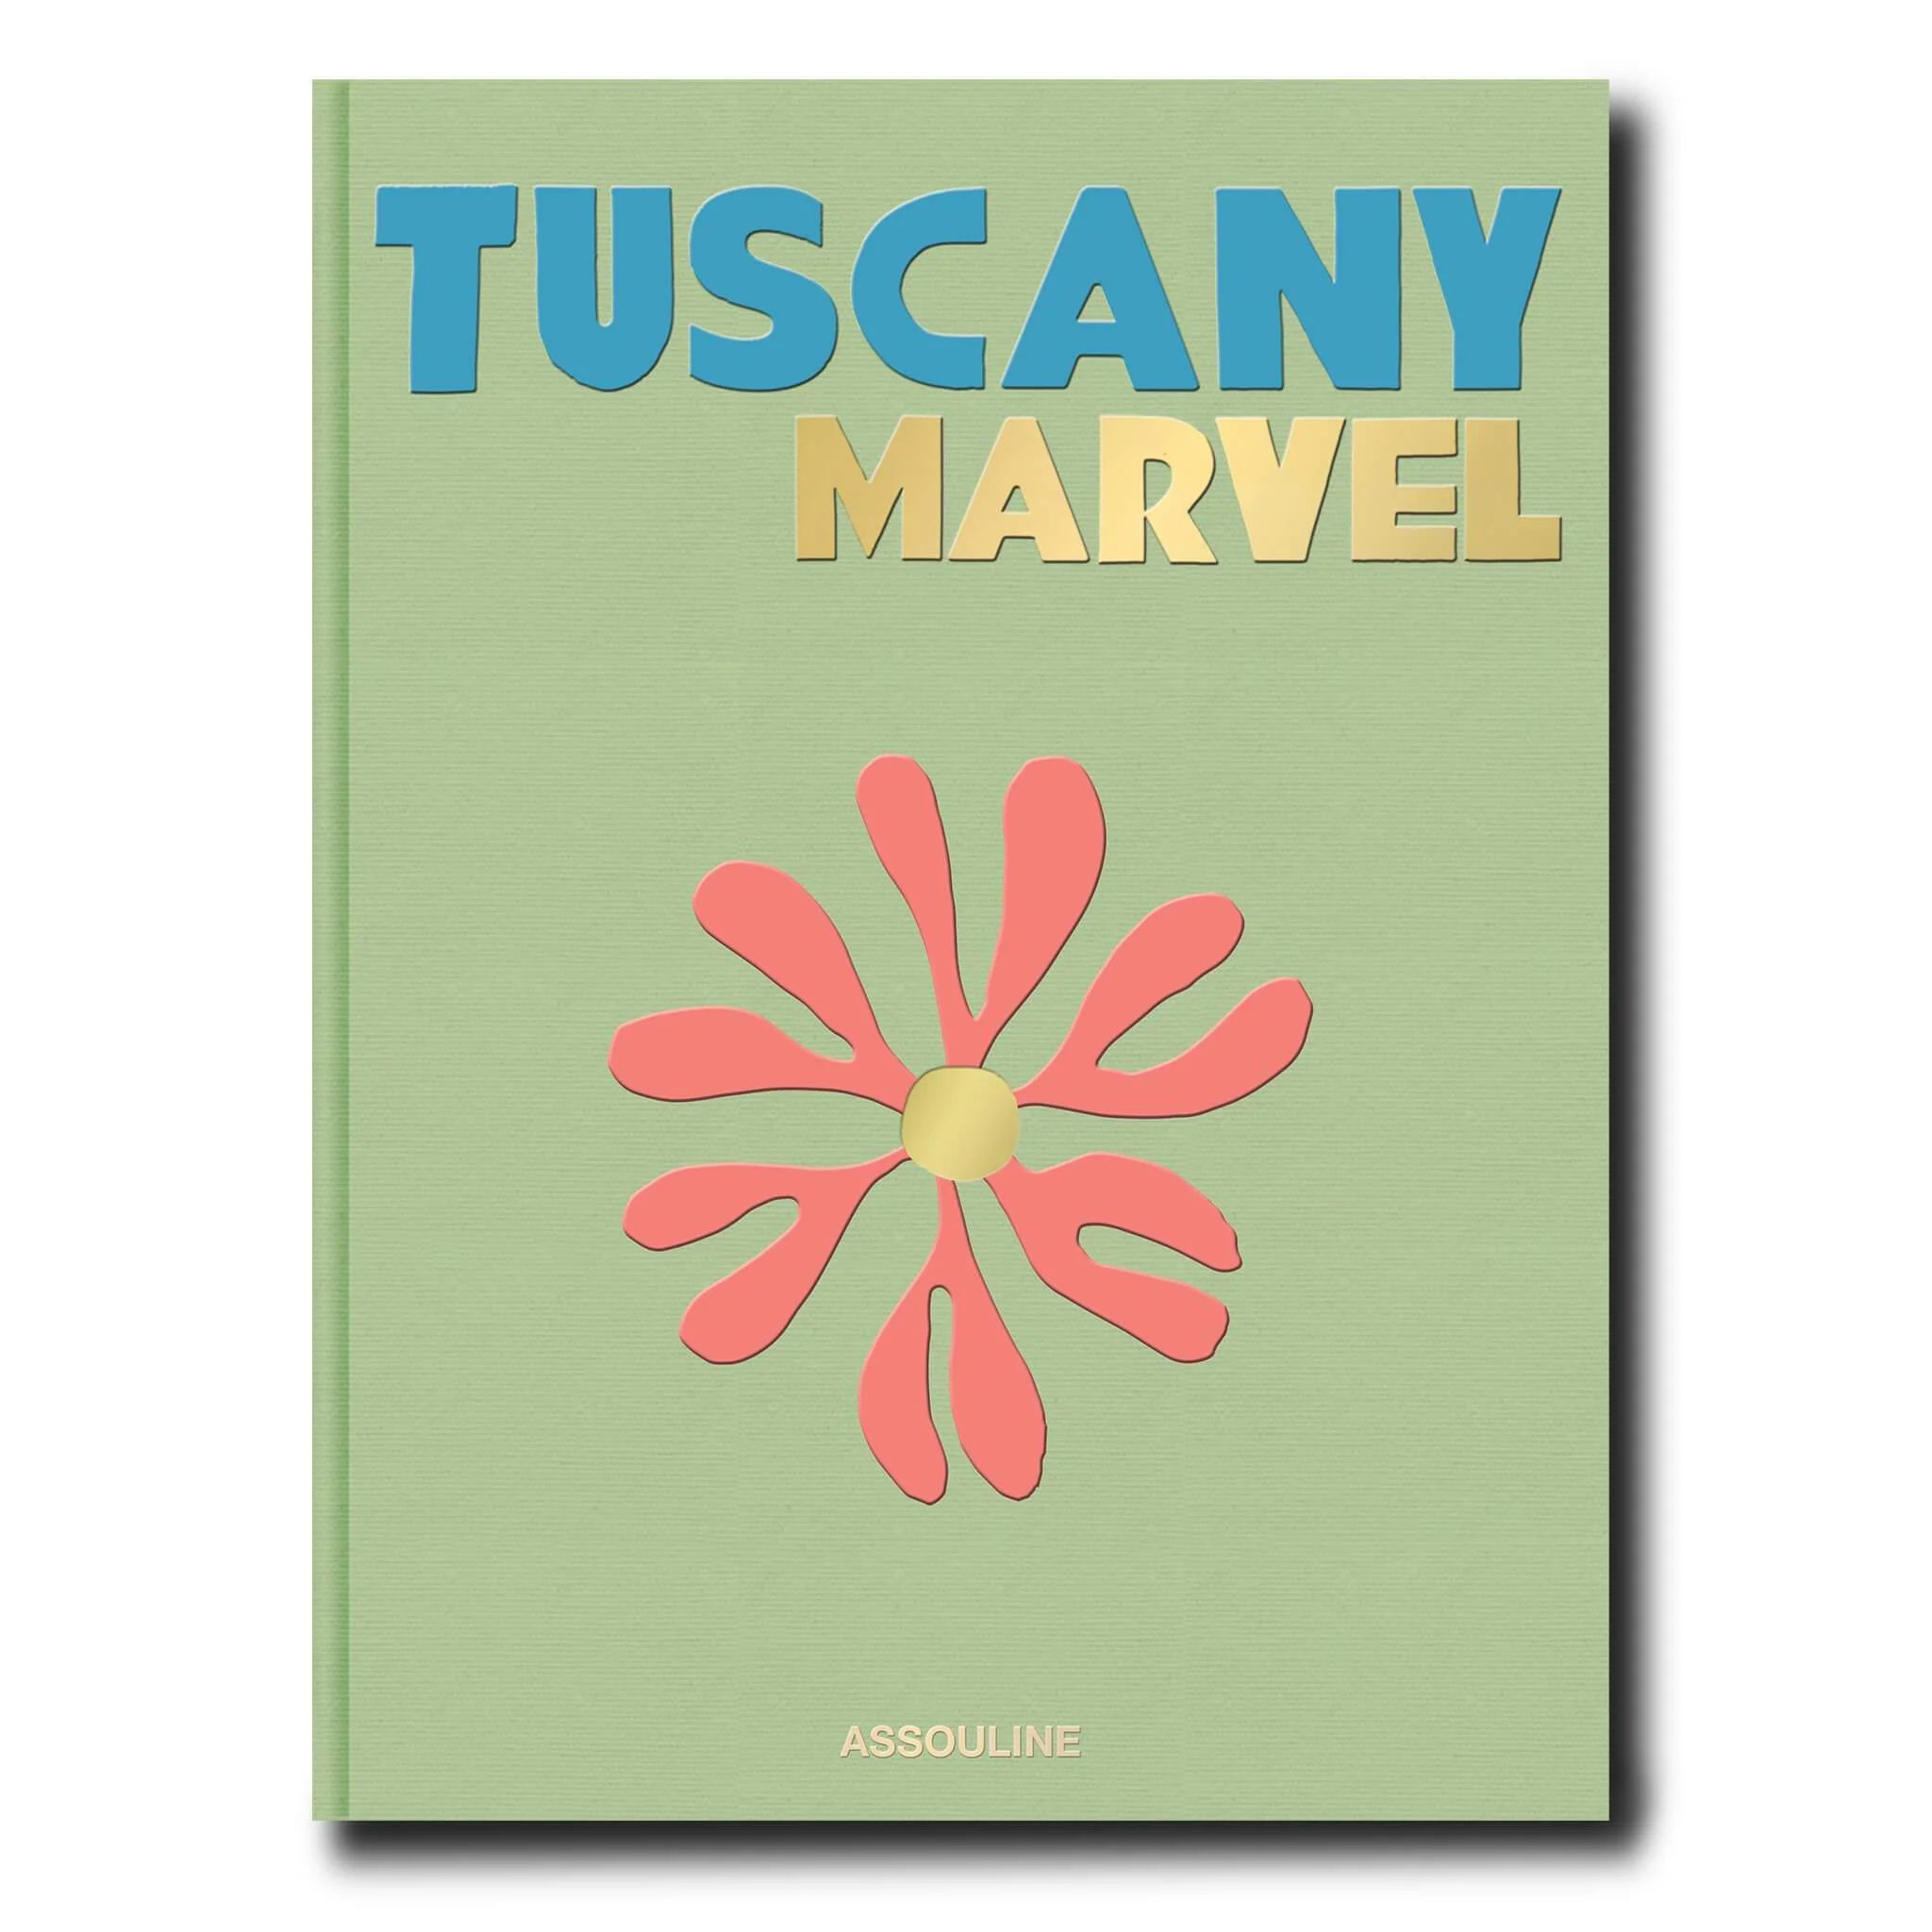 Tuscany Marvel by Cesare Cunaccia - Coffee Table Book | ASSOULINE | Assouline